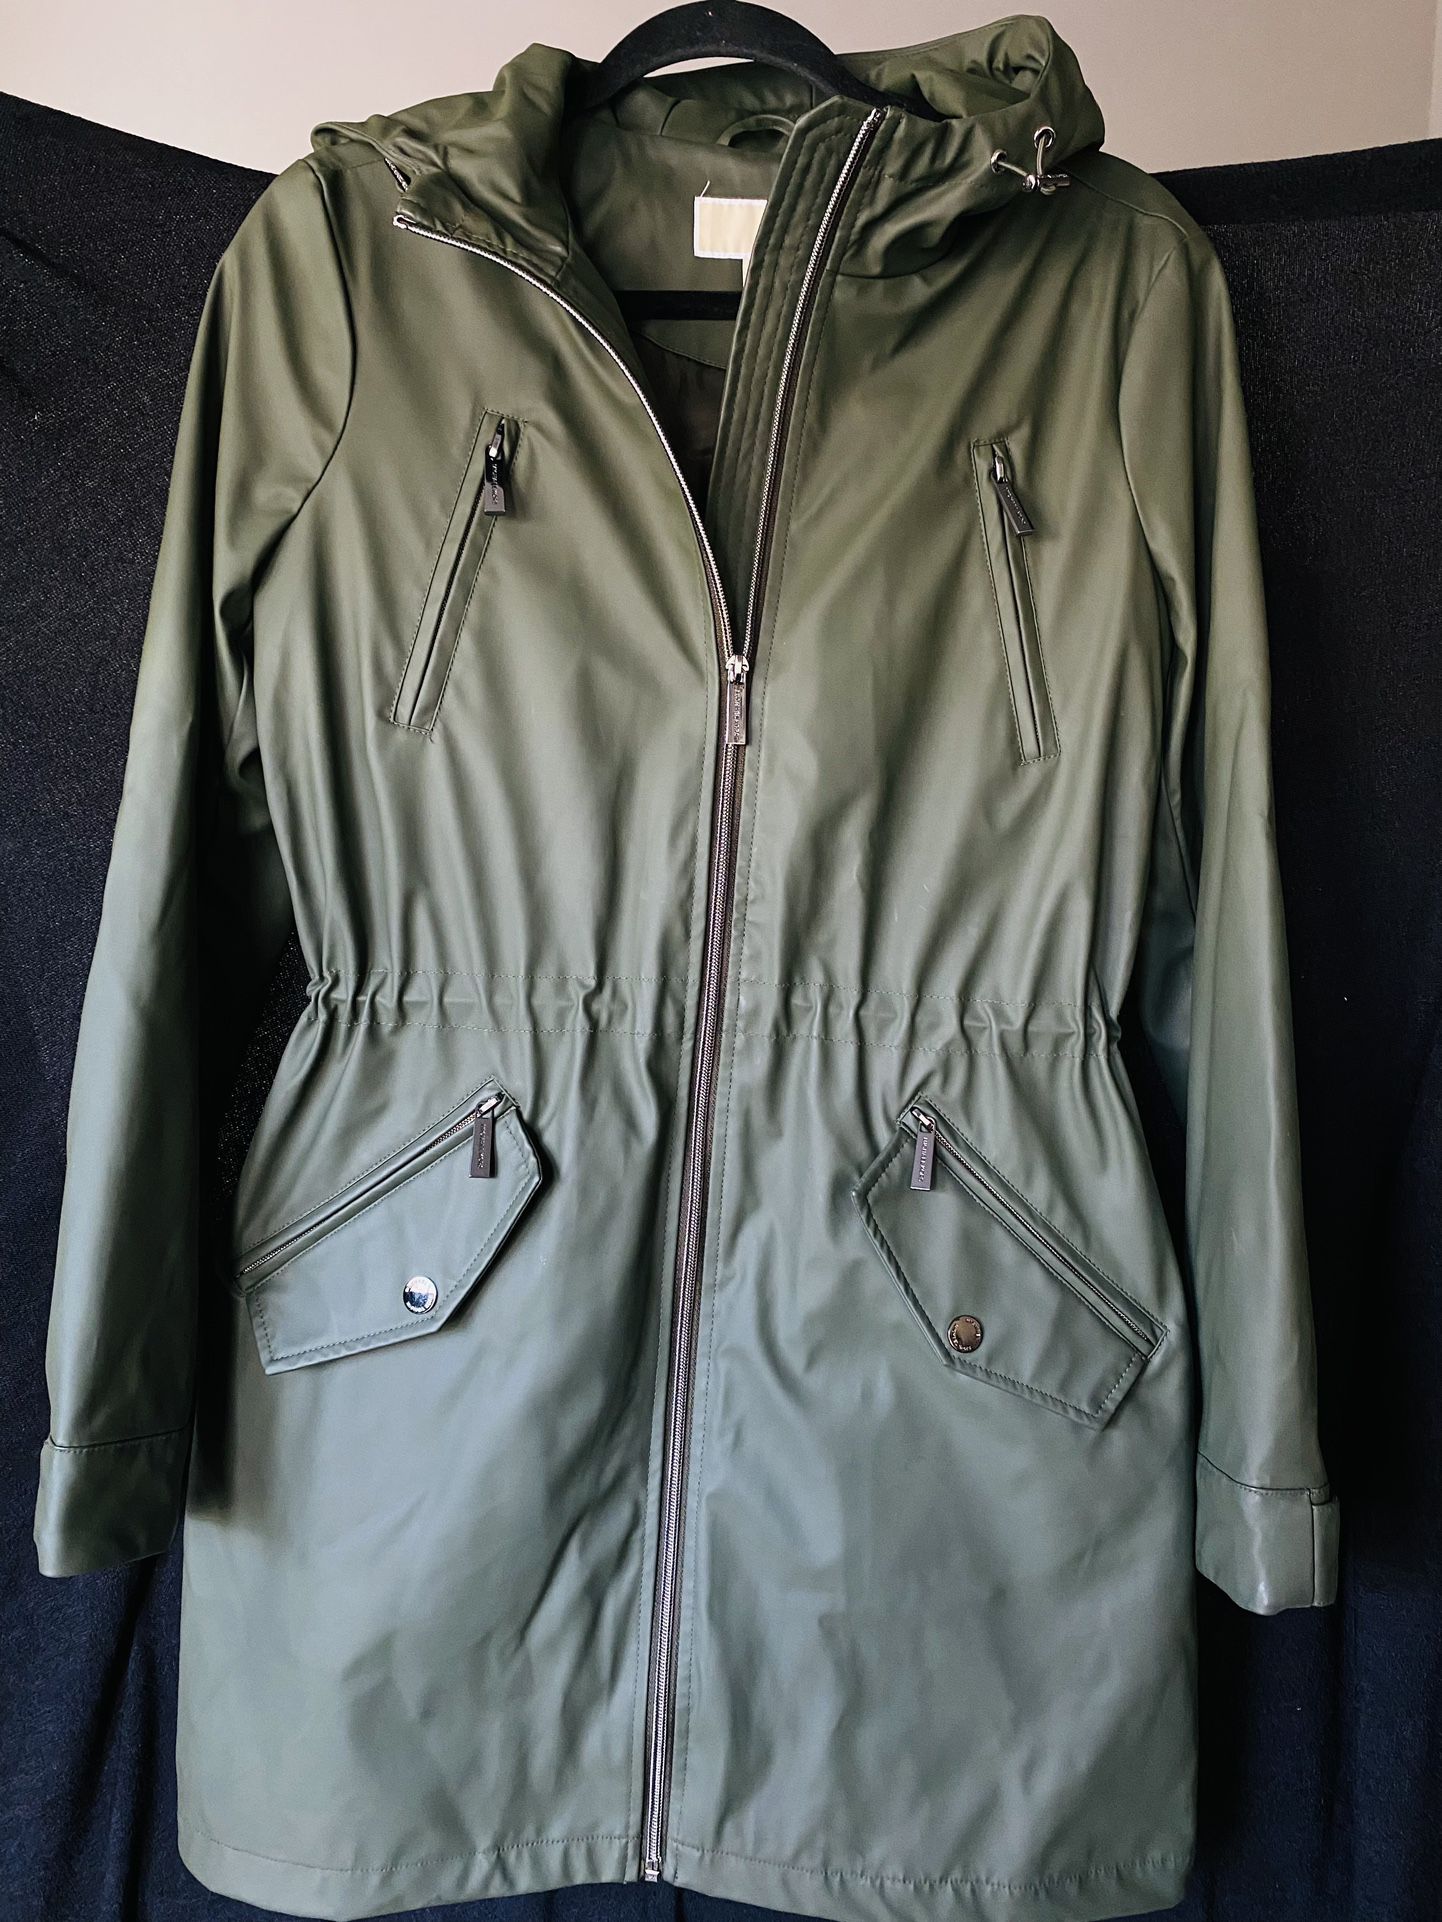 Pre Loved Condition Michael Kors Womens Rain Jacket - XS for Sale in Chula  Vista, CA - OfferUp